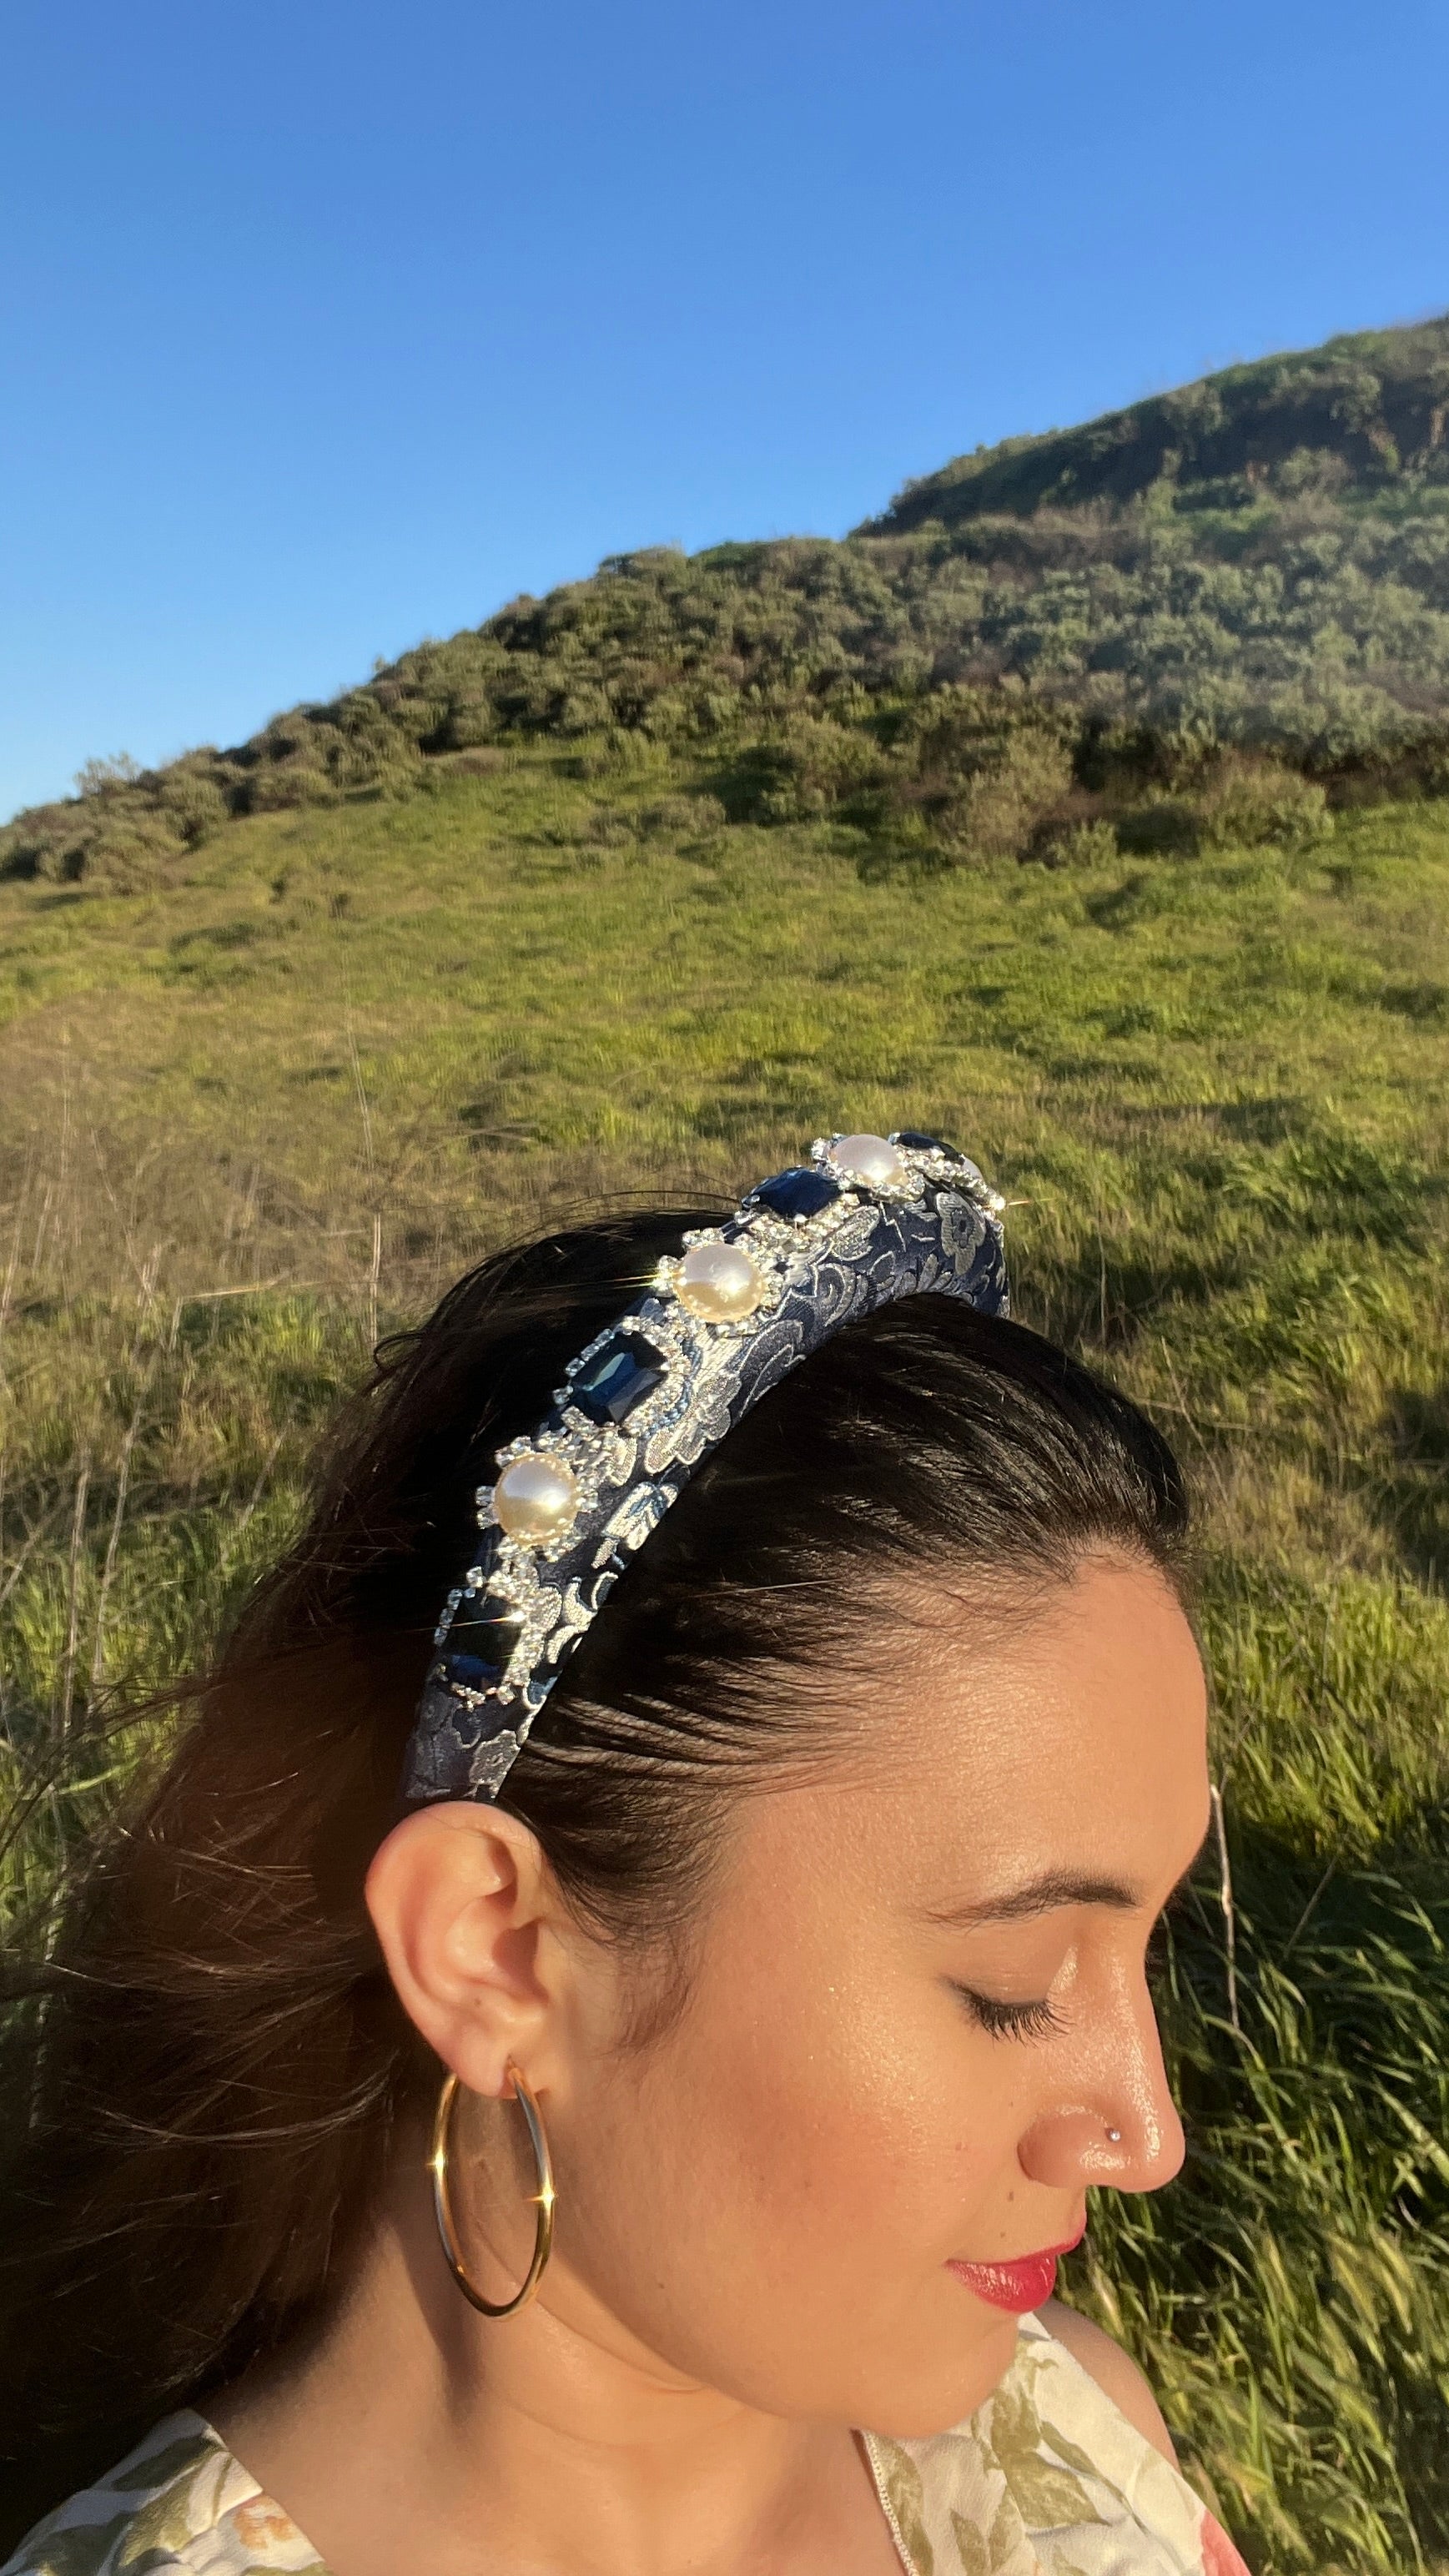 Fluffy Headband - Style by me